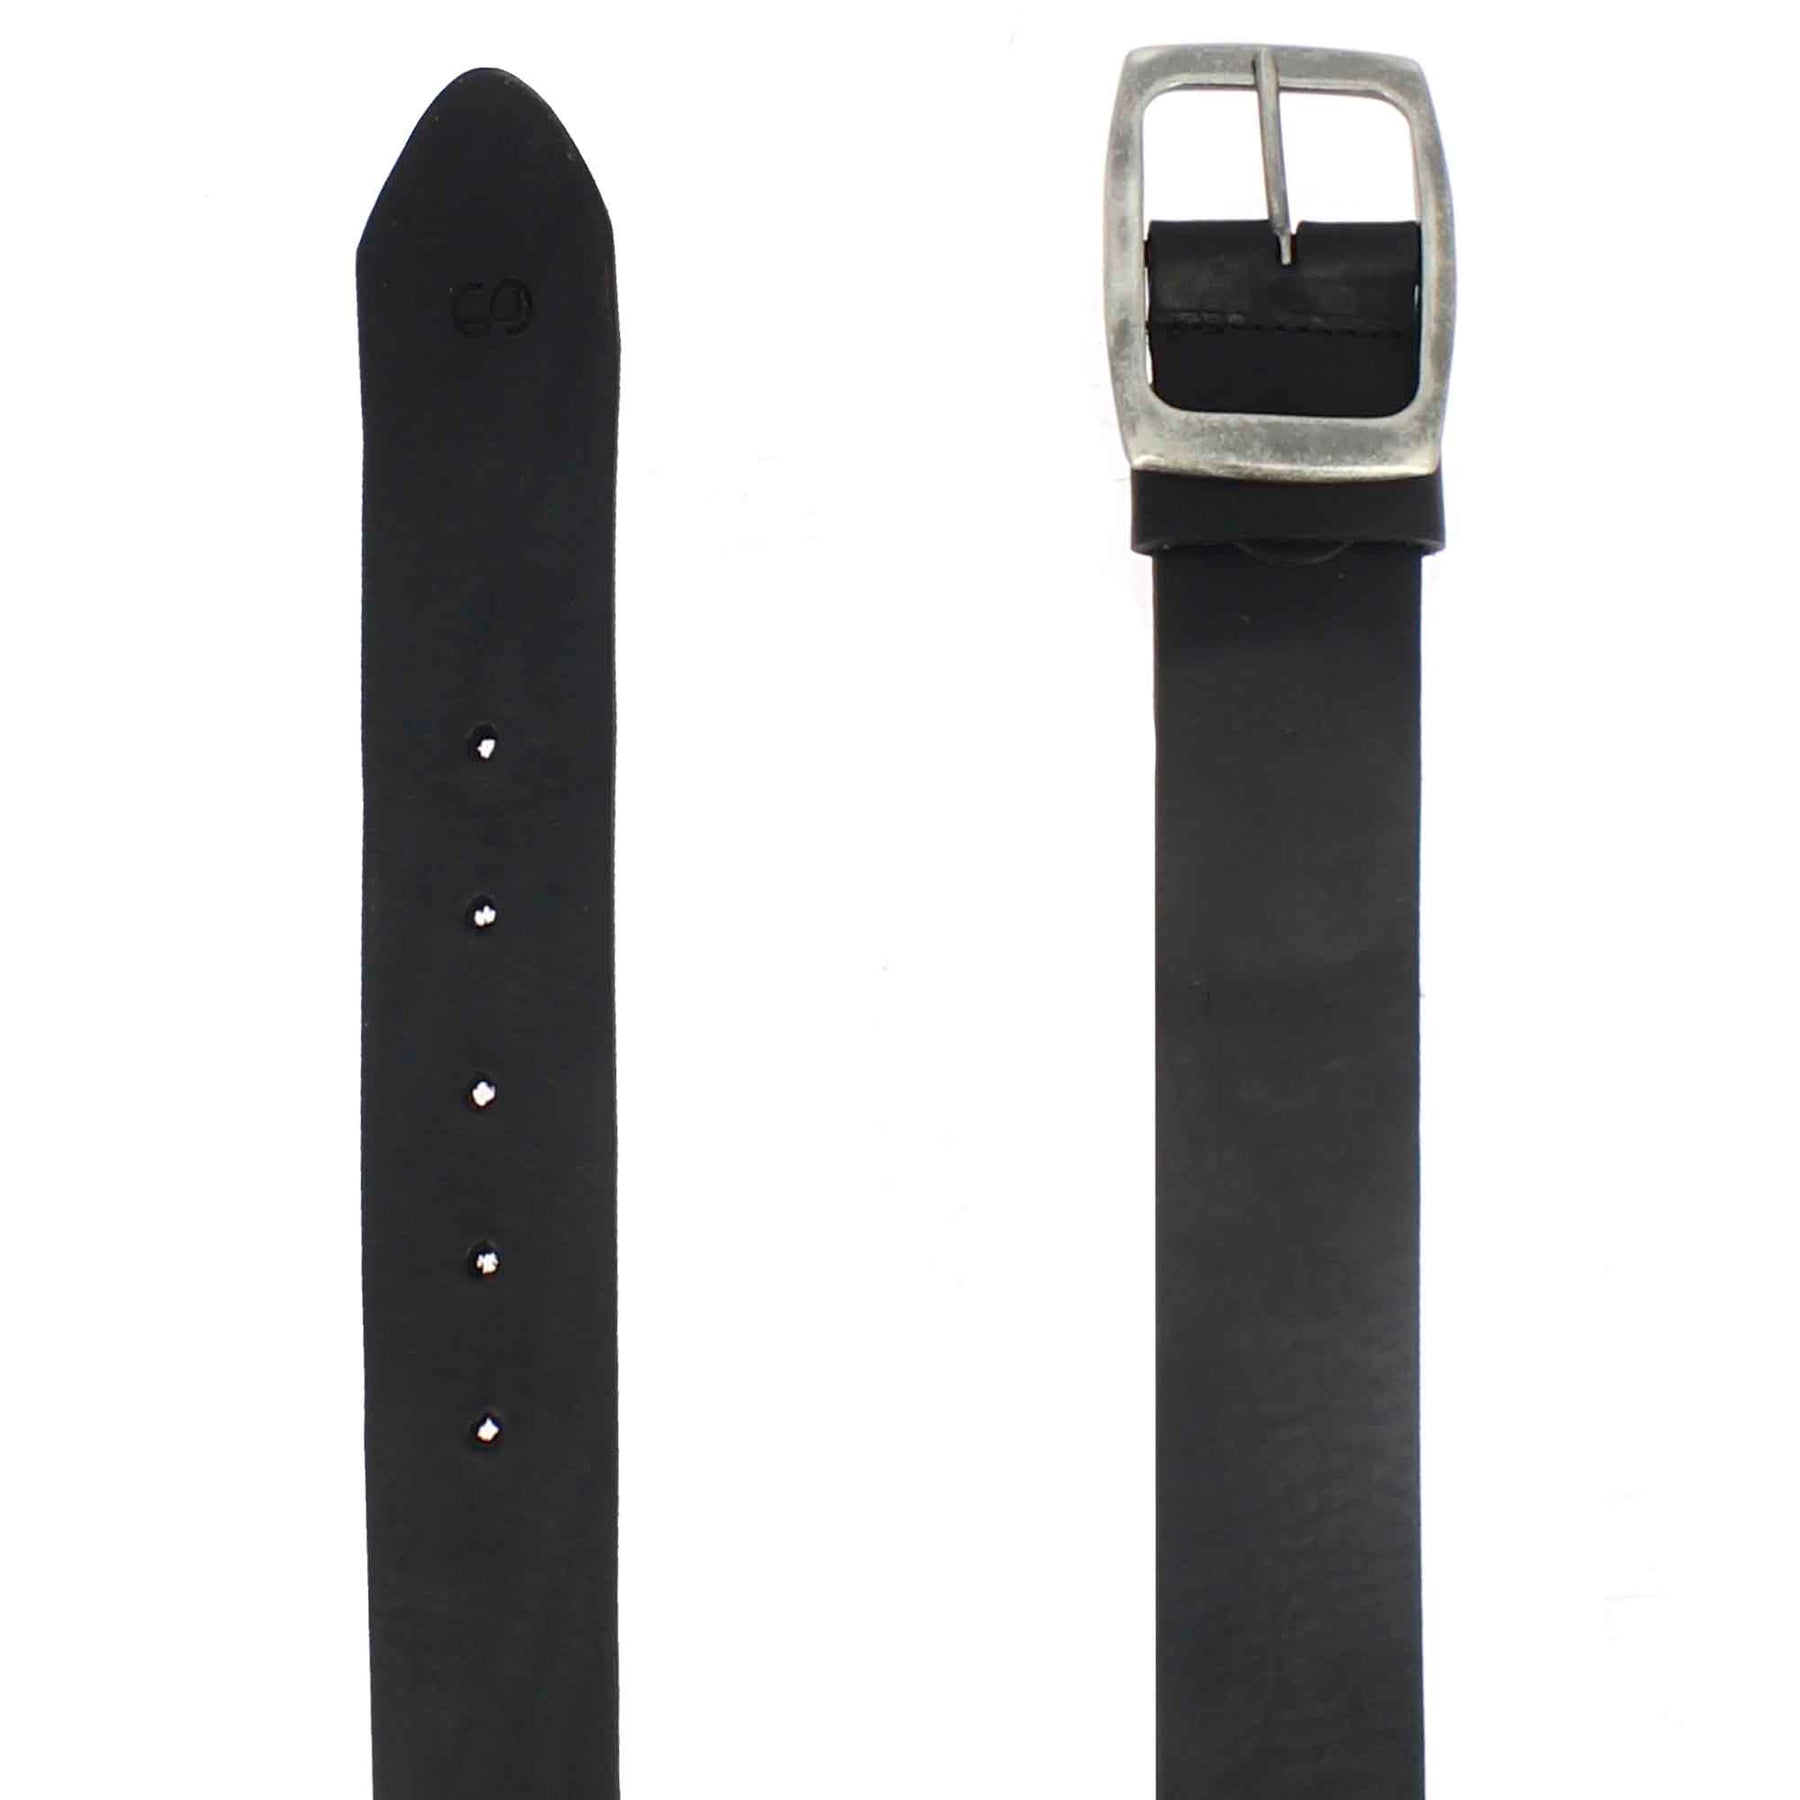 Classic men's belt in black leather with buckle